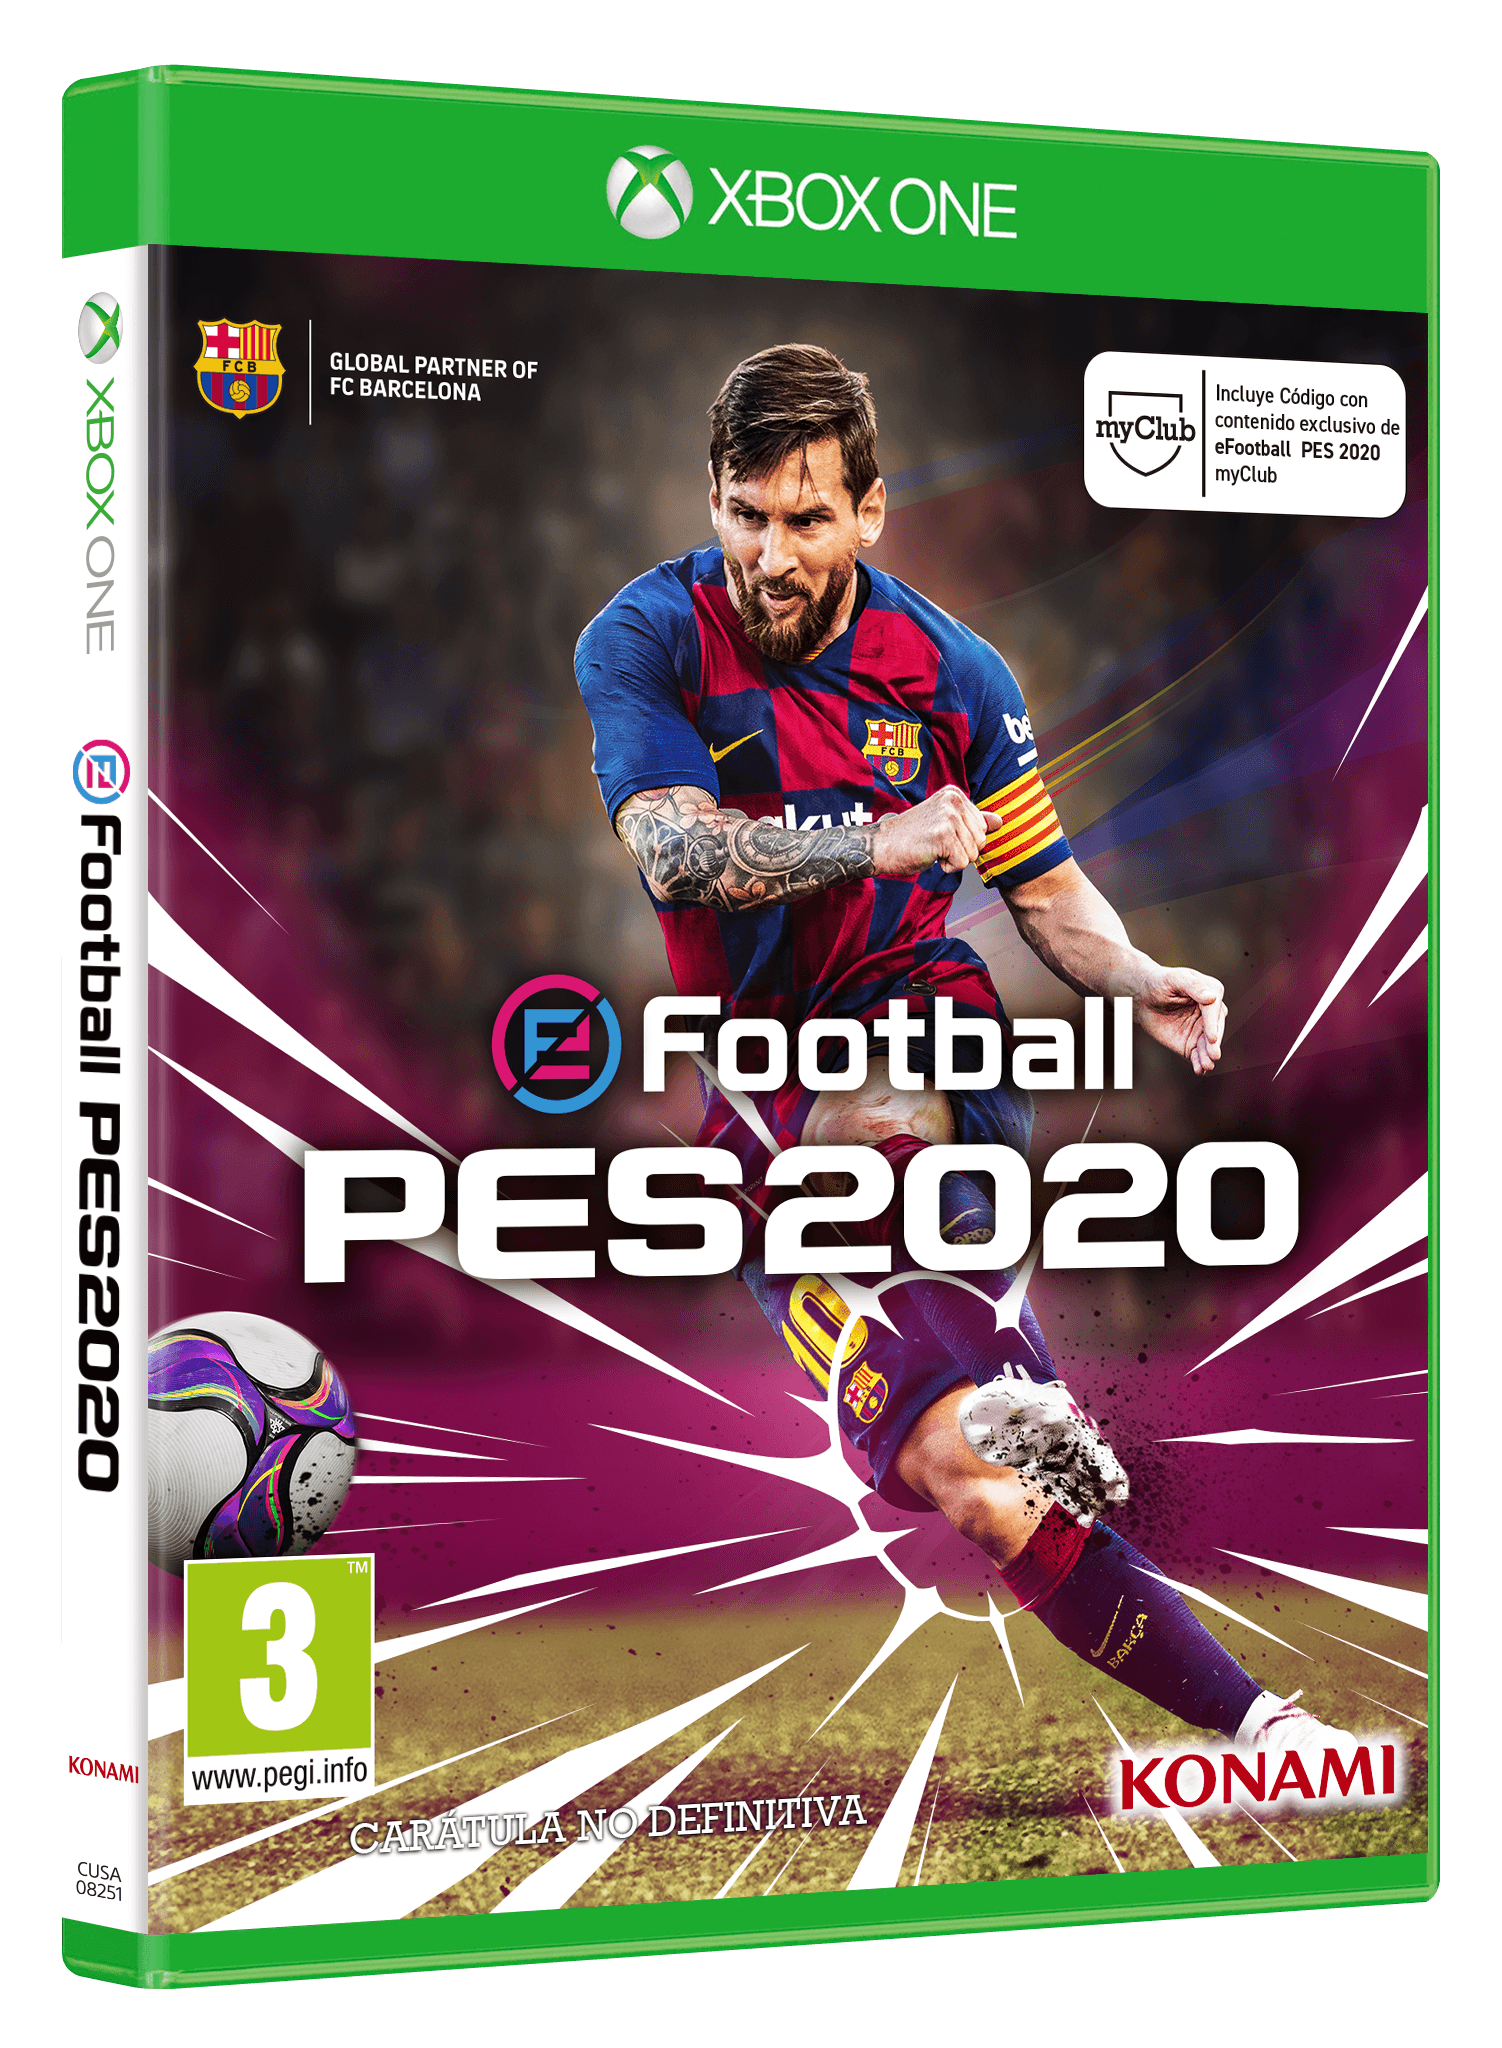 All there is to know about PES 2020: News, New Master League